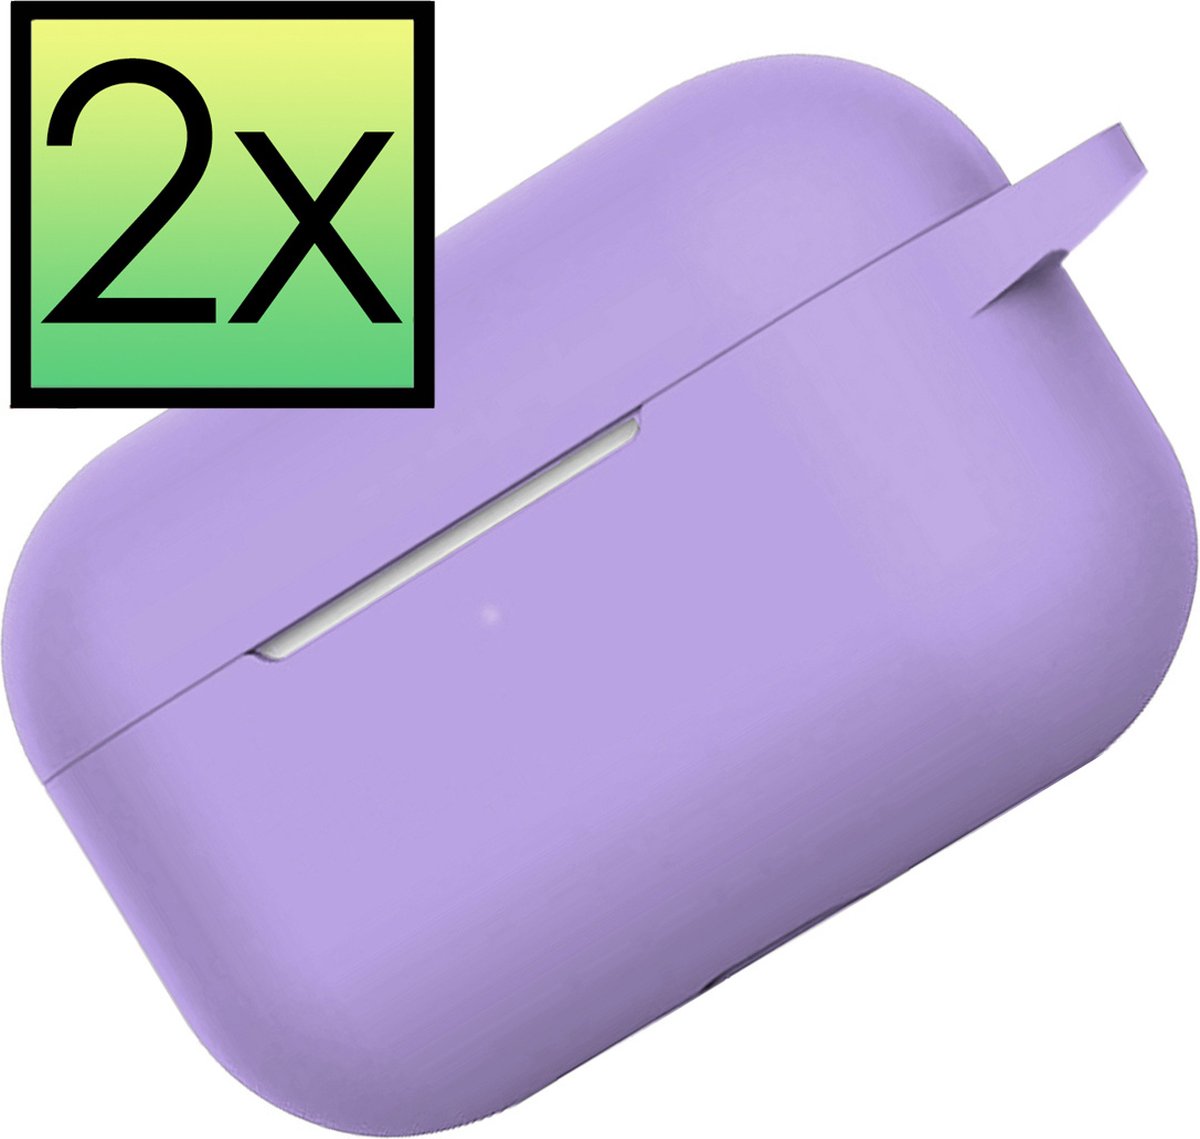 Hoes Geschikt voor Apple Airpods Pro Hoesje Cover Silicone Case Hoes - 2x - Lila